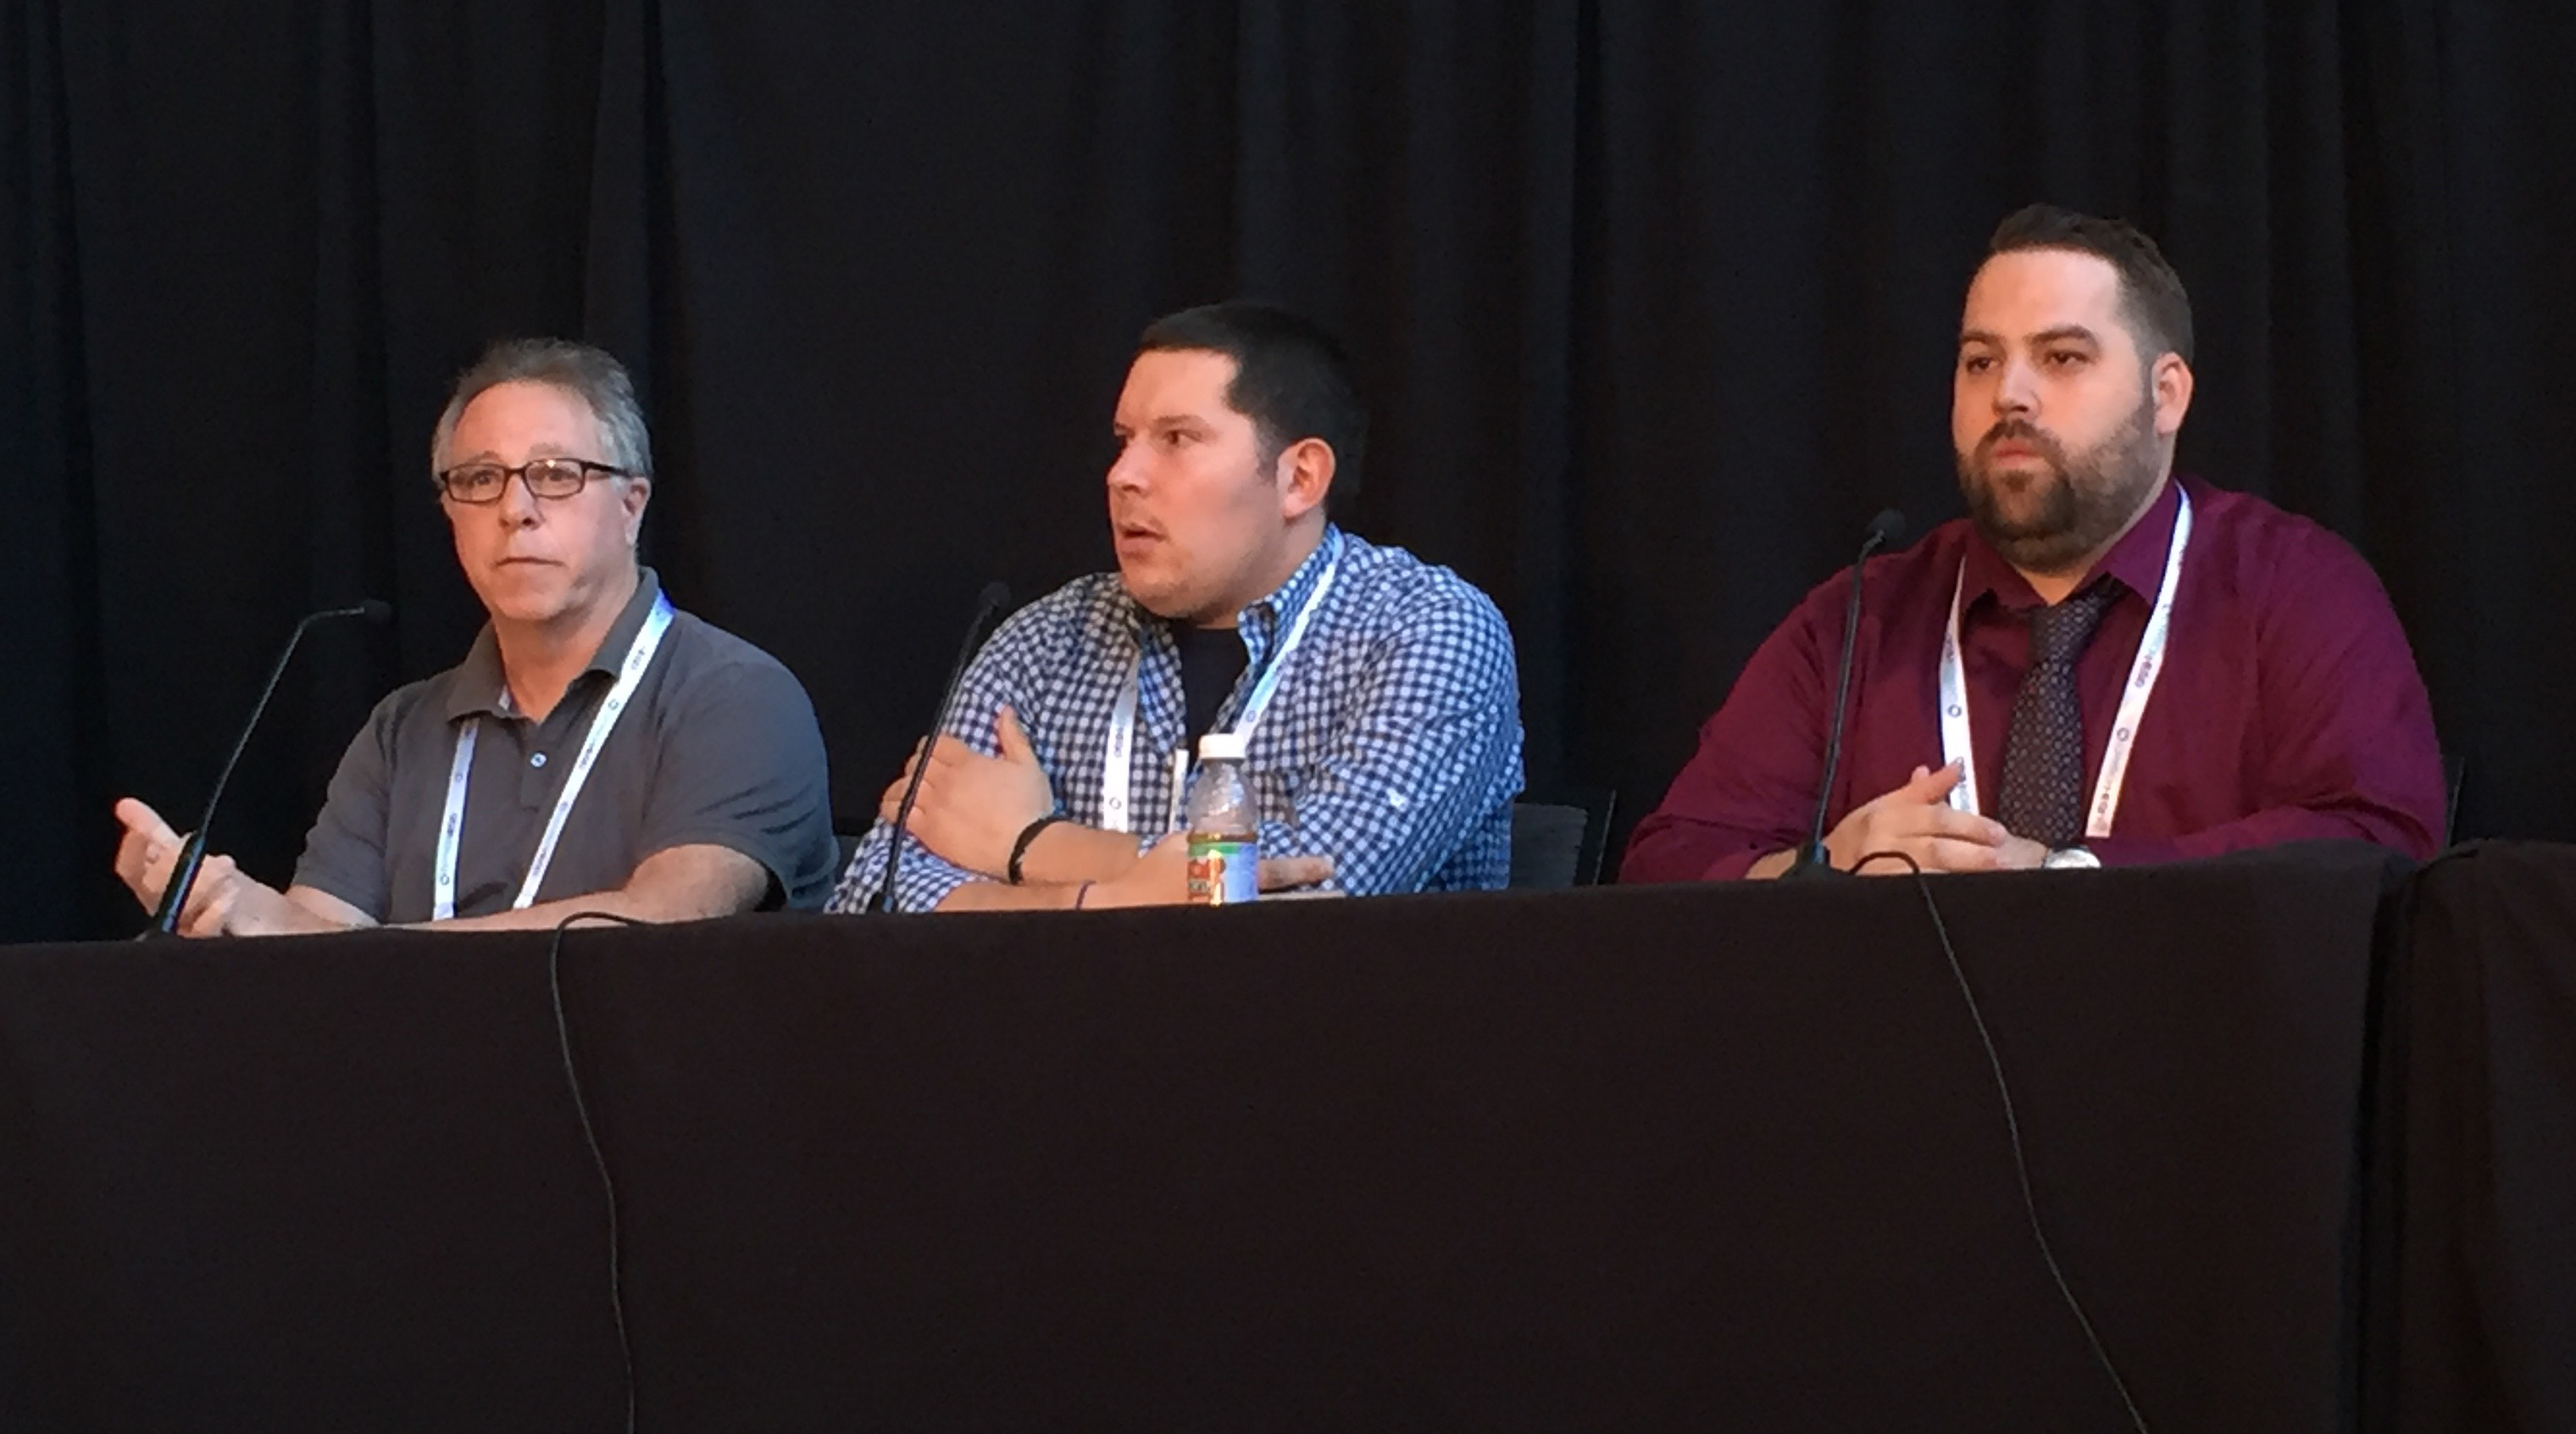 Madison Square Garden’s Marc Bauman, the Philadelphia Union’s Carl Mandell, and the Philadelphia Phillies’ Sean Rainey participate in a panel on production strategies for entertaining fans in-venue.